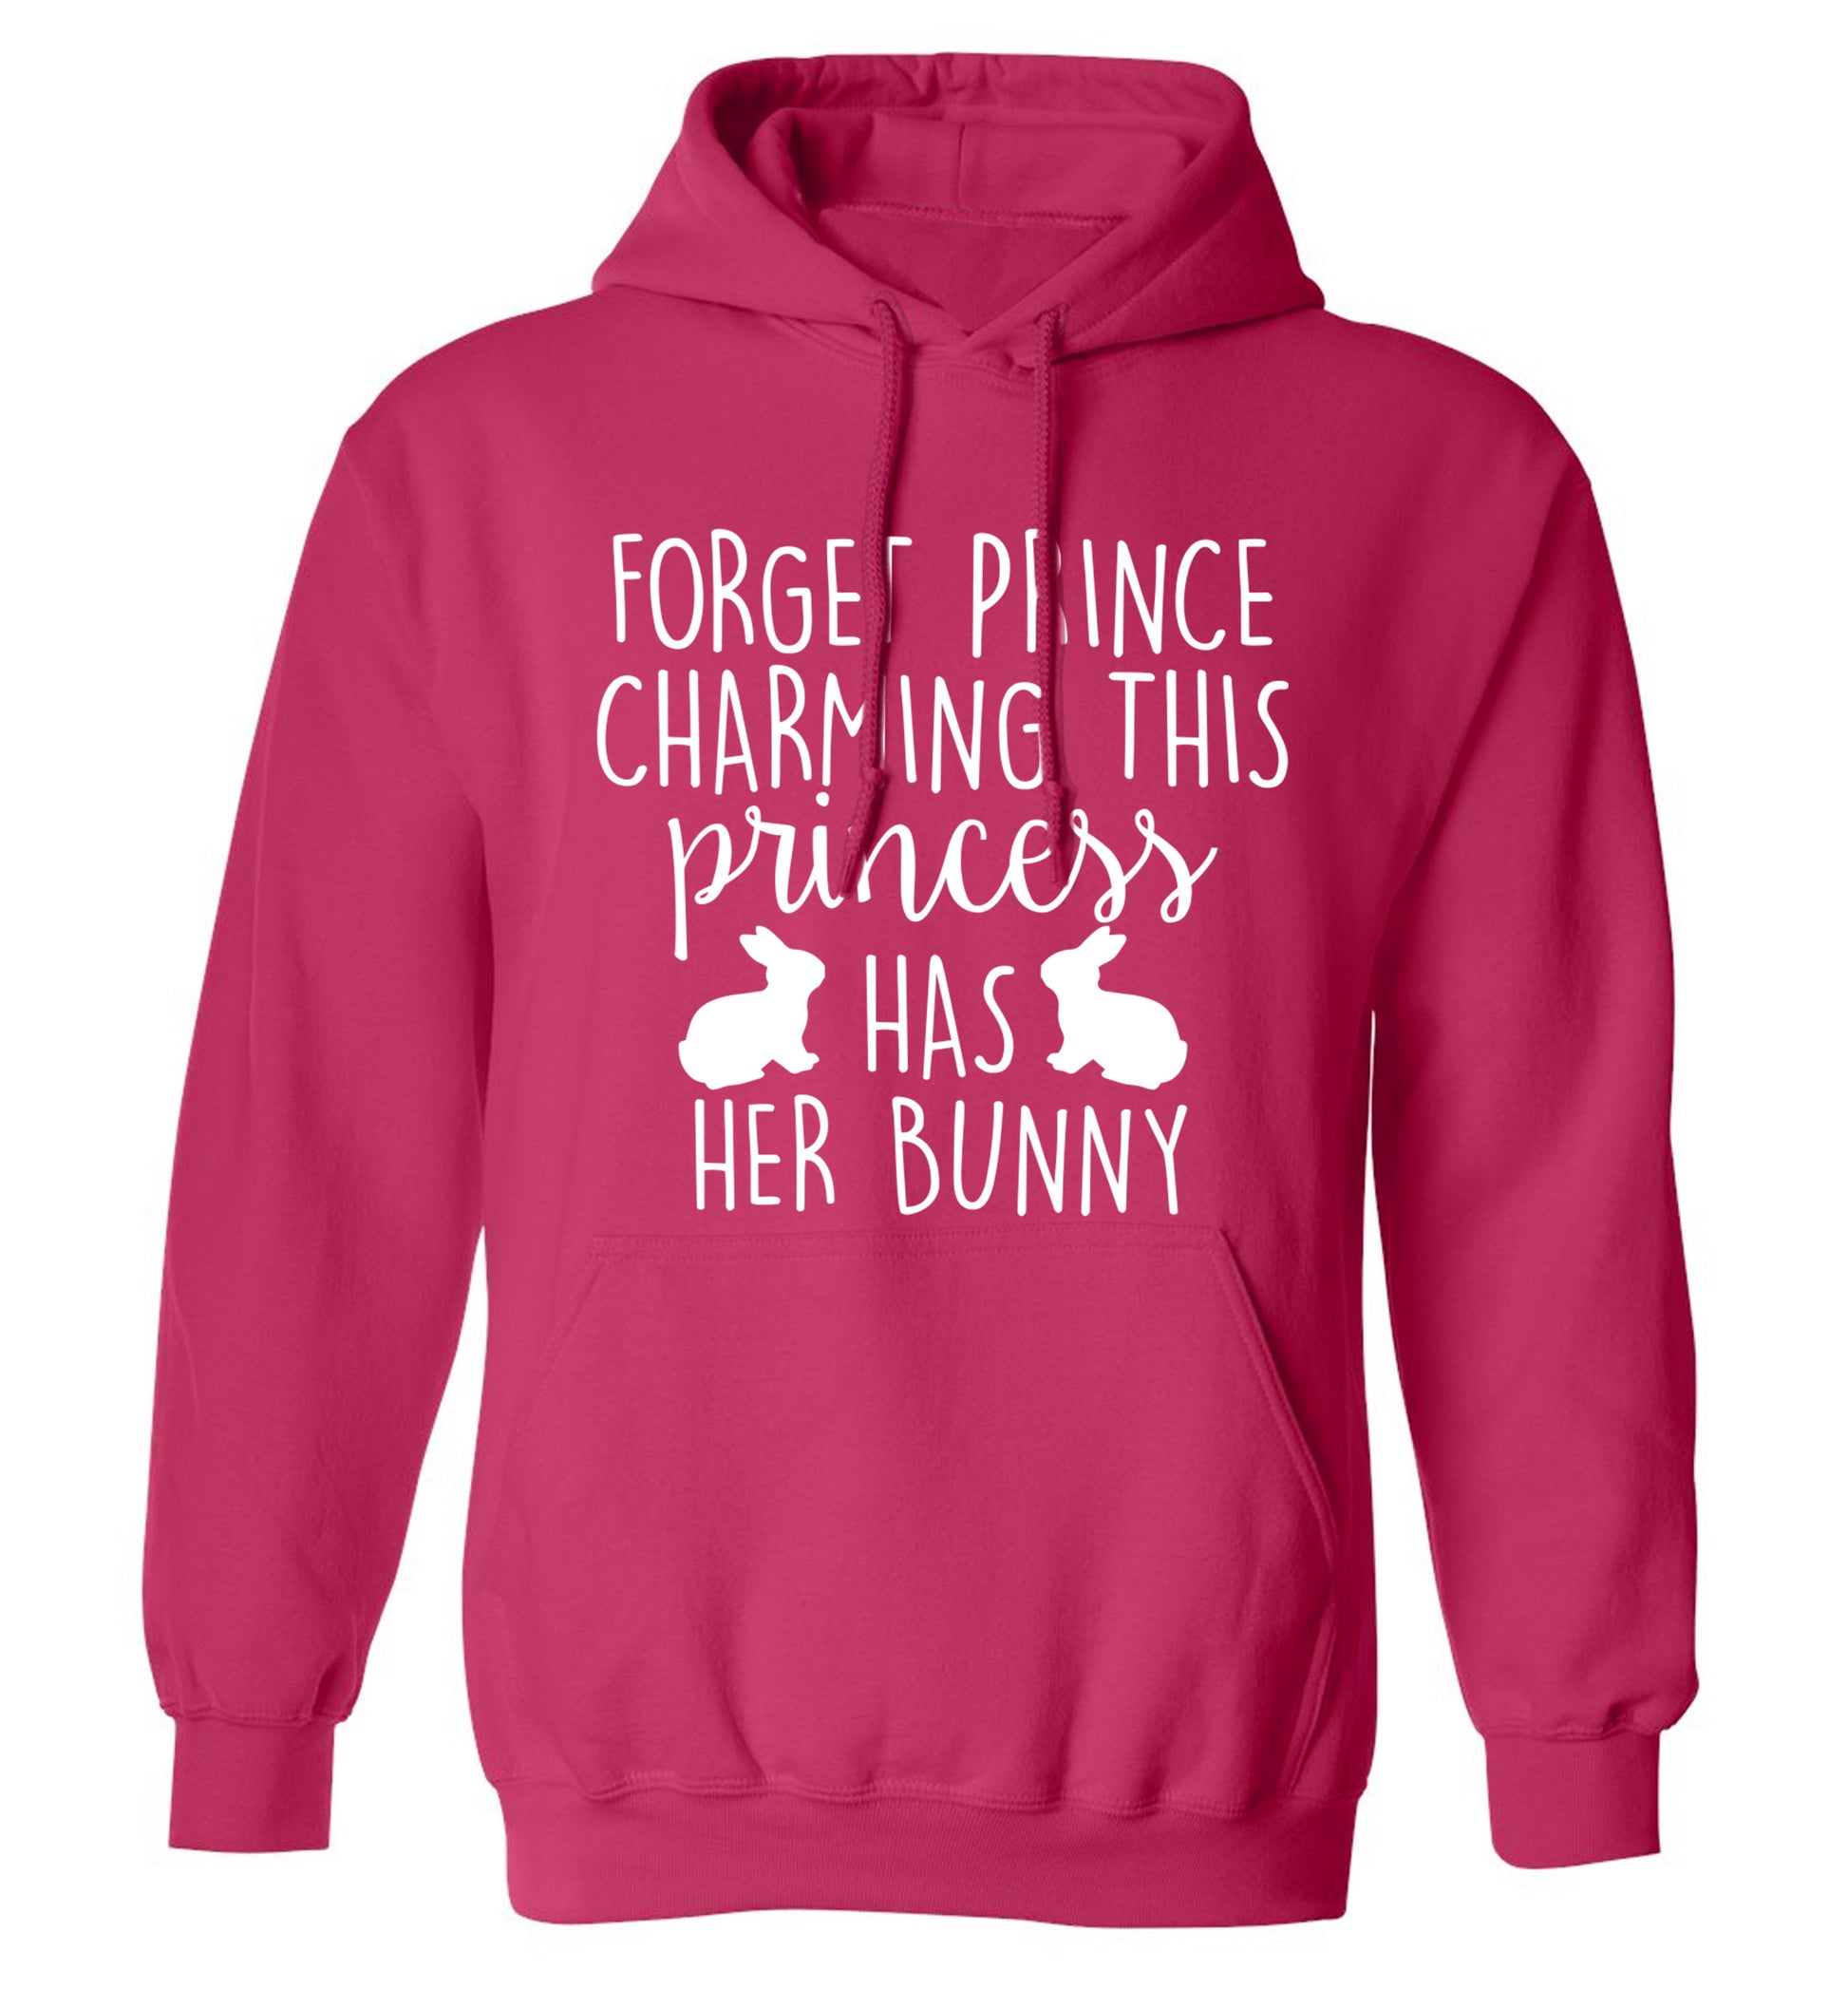 Forget prince charming this princess has her bunny adults unisex pink hoodie 2XL